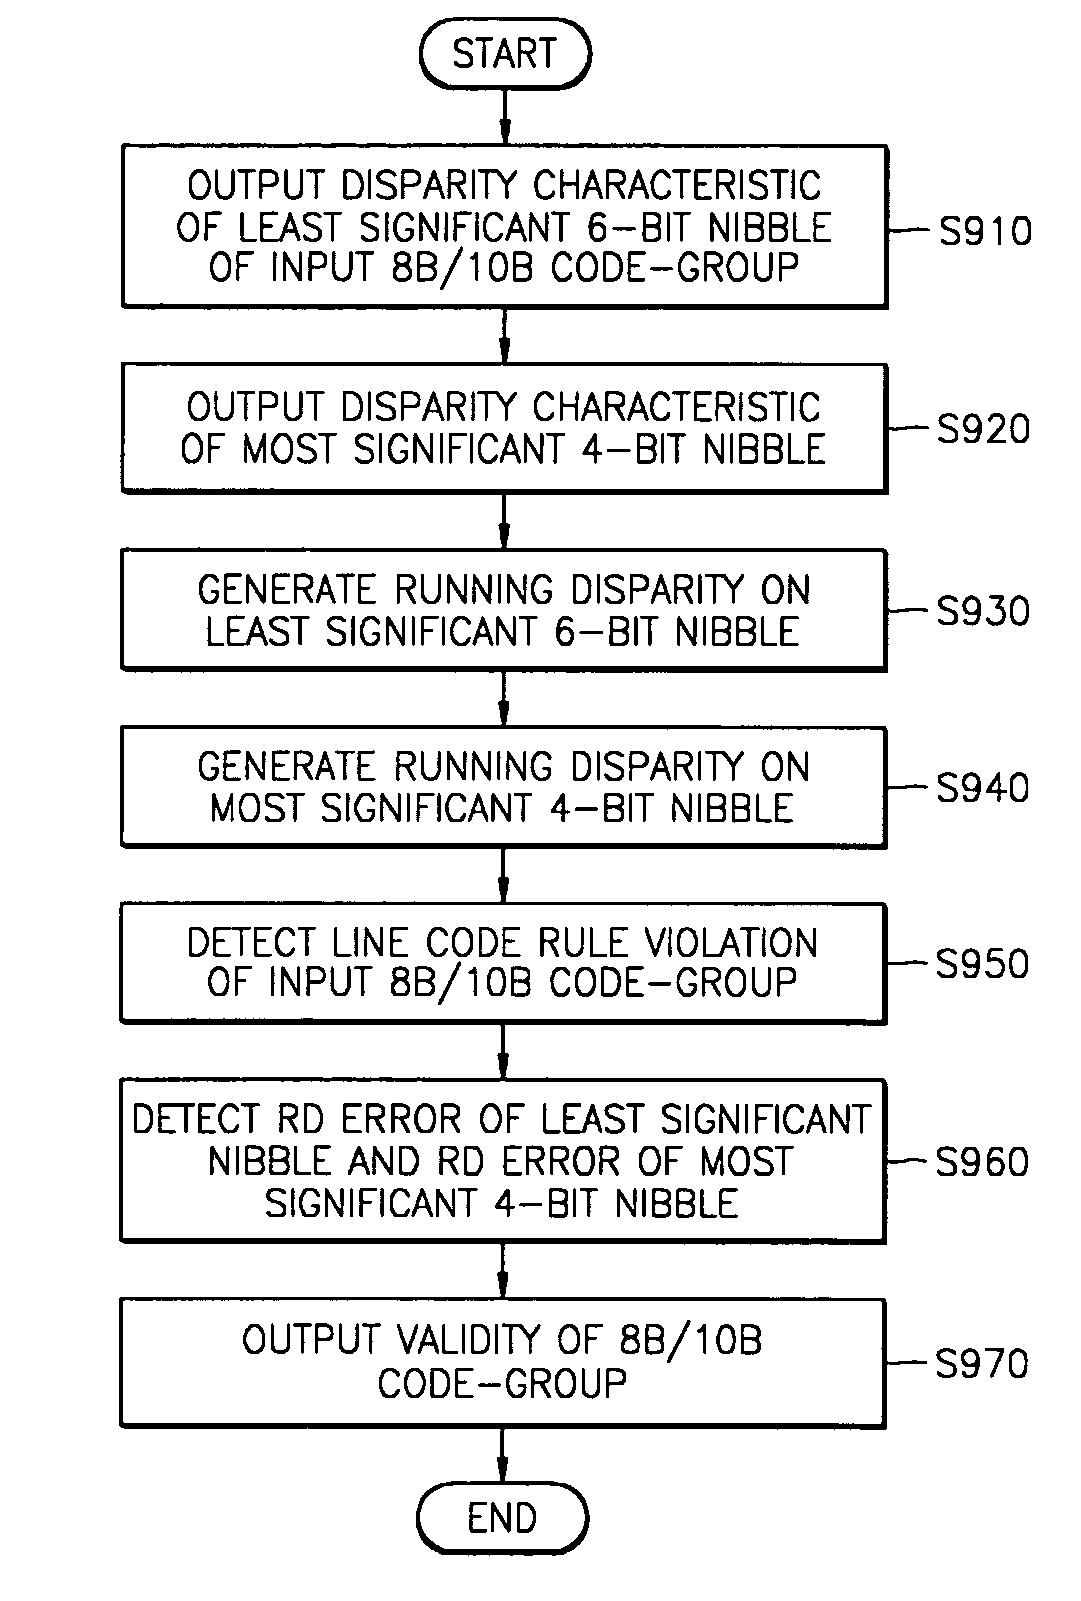 Apparatus and method for 8B/10B code-group validity check